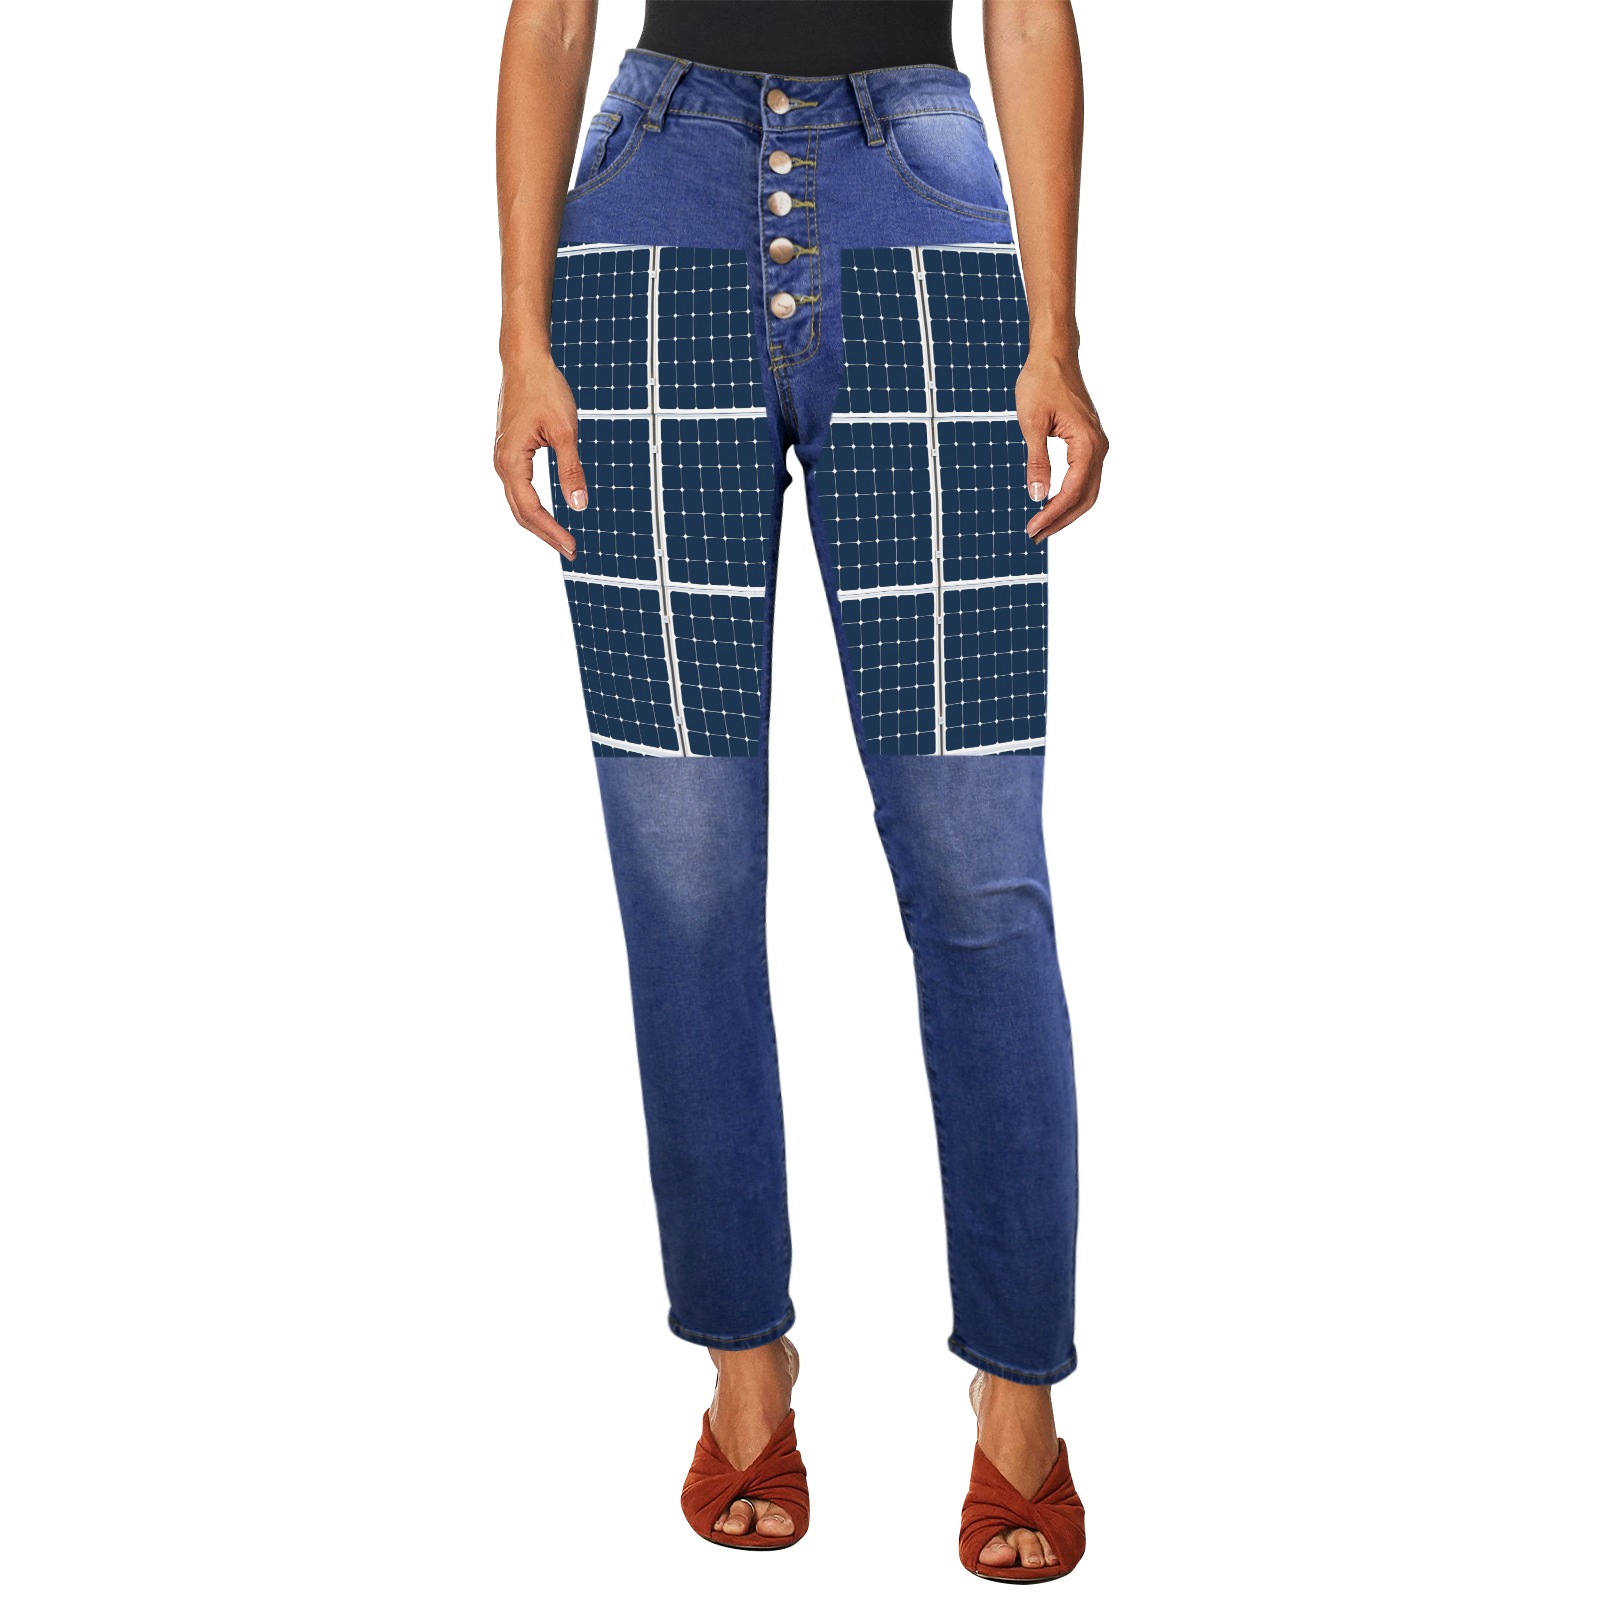 Solar Technology Power Panel Image Photovoltaic Women's Jeans (Front Printing)